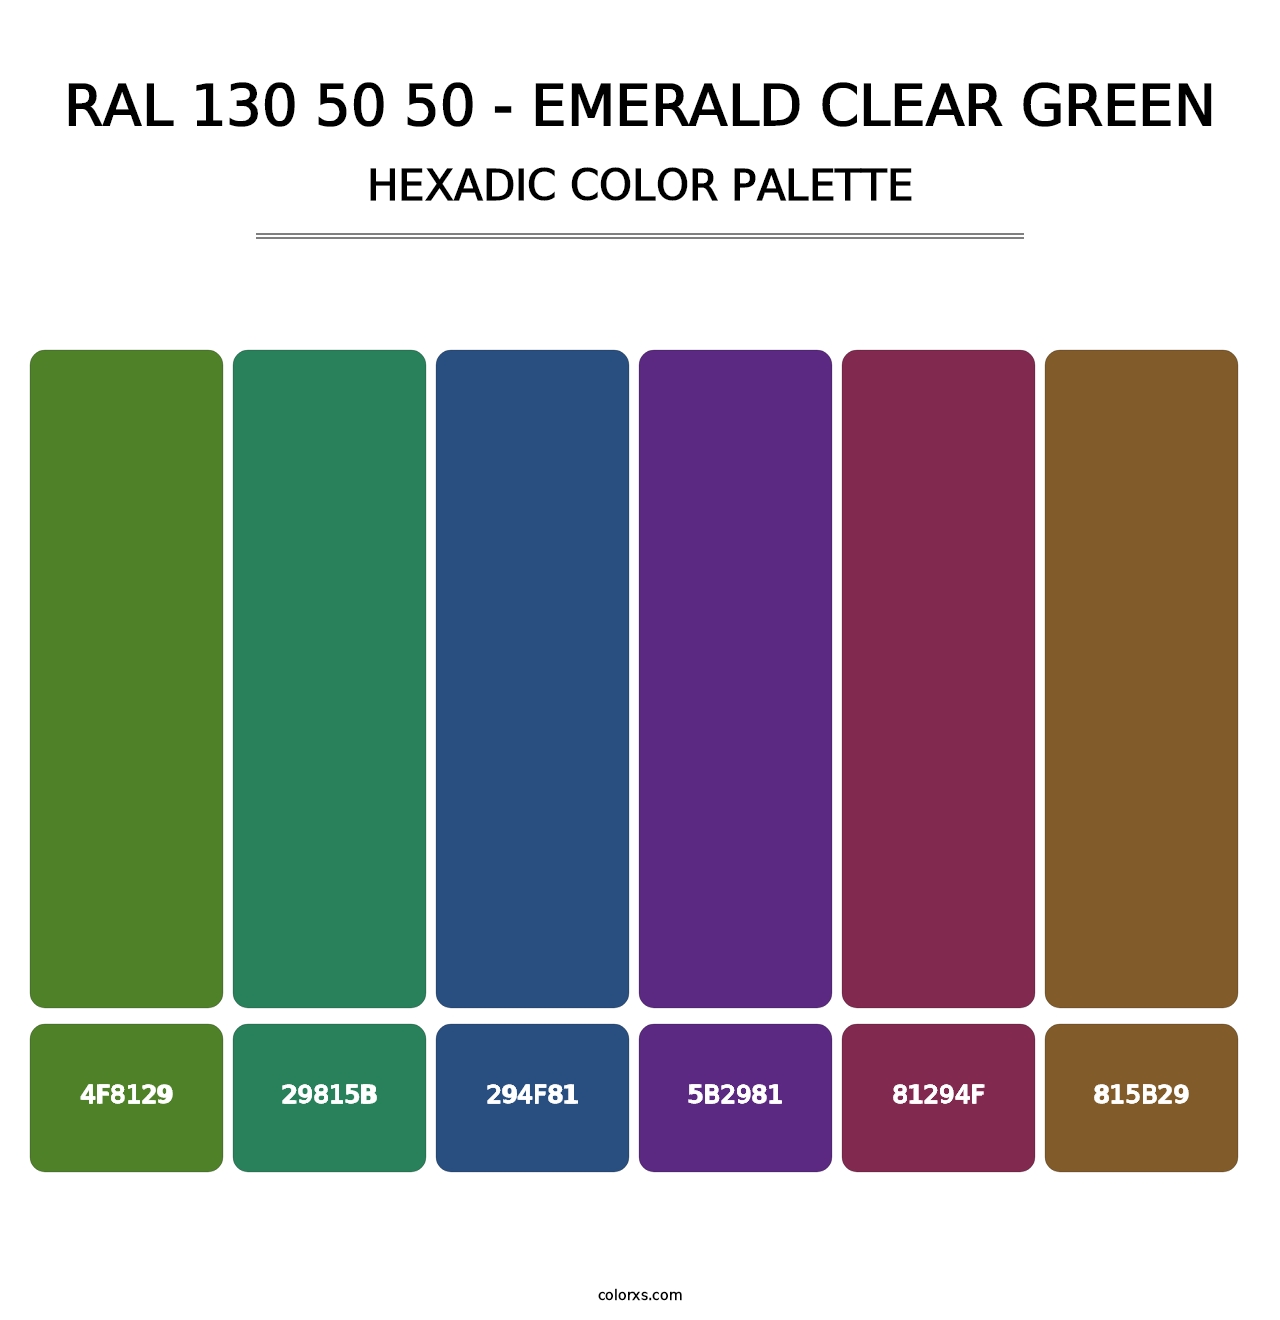 RAL 130 50 50 - Emerald Clear Green - Hexadic Color Palette